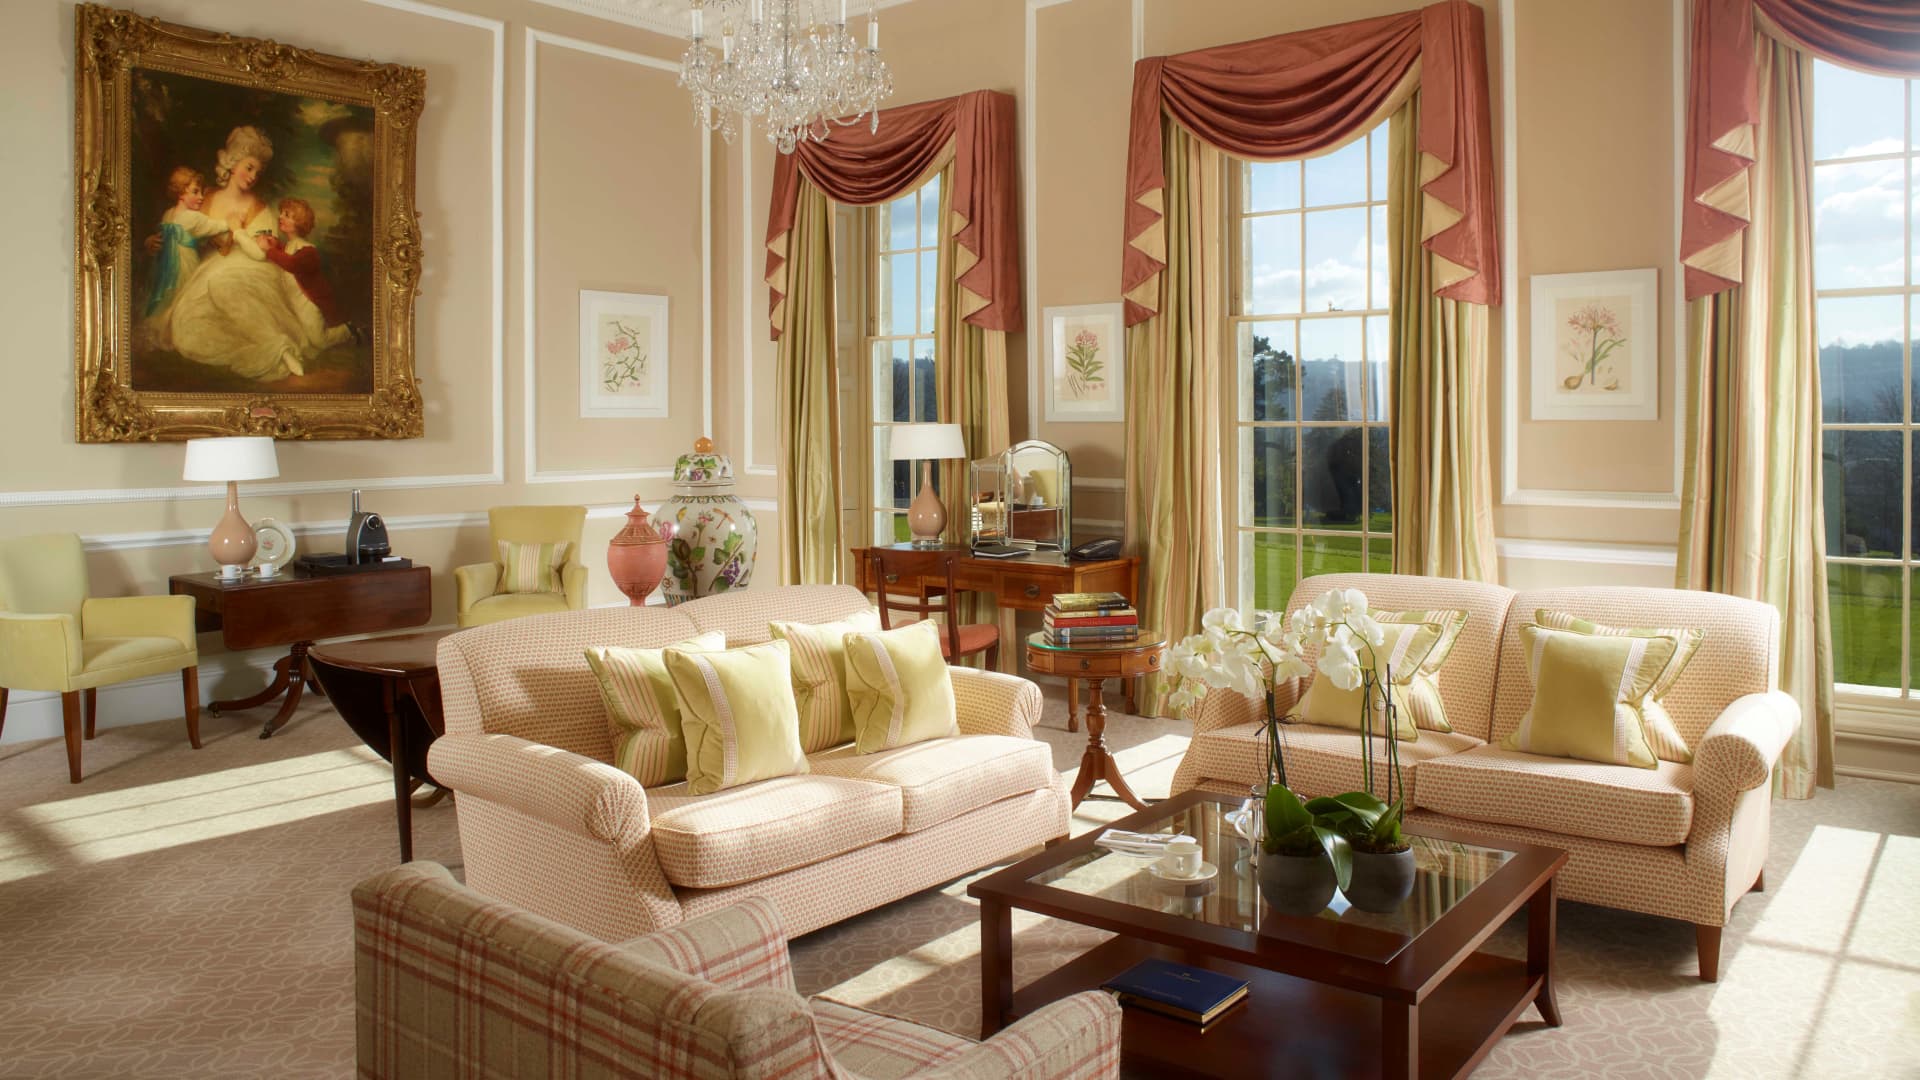 The drawing room of the Sir Percy Blakeney Suite at the Royal Crescent Hotel & Spa in Bath, England.